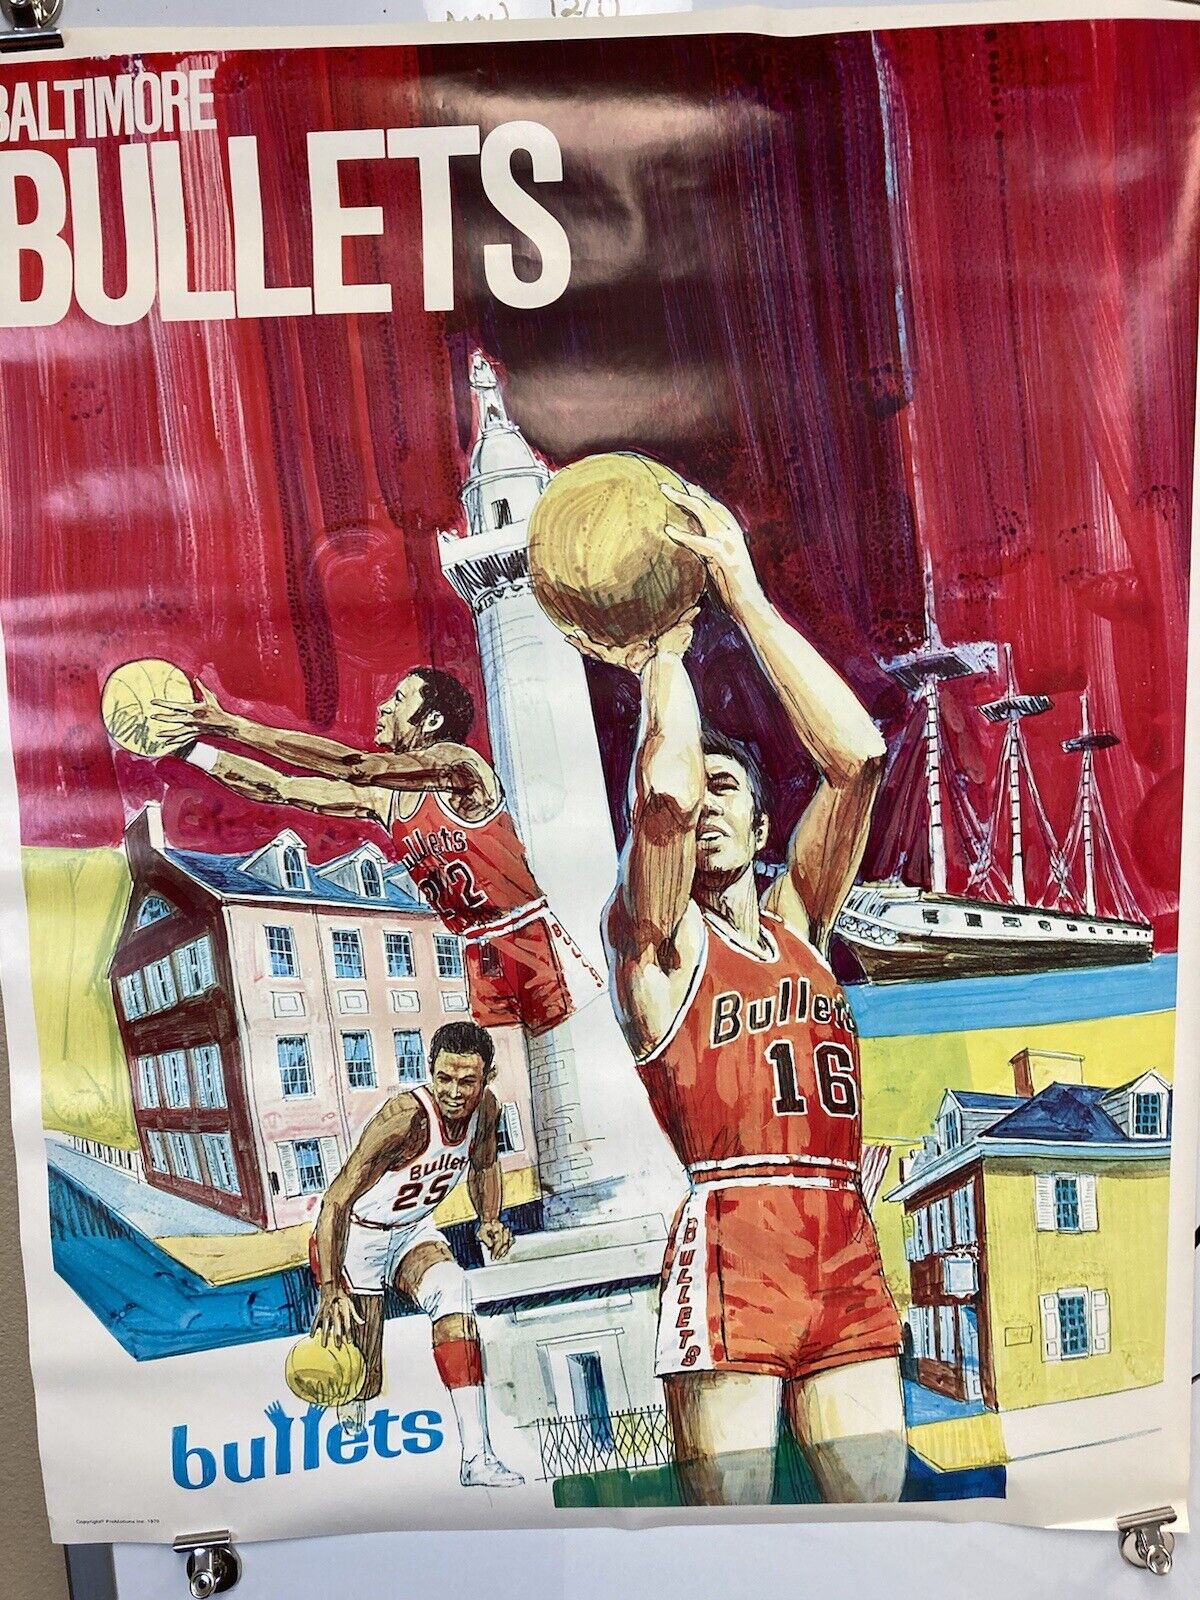 Vintage Rare 1970 Baltimore Bullets 23 X 29 Inch Poster by Promotions Inc